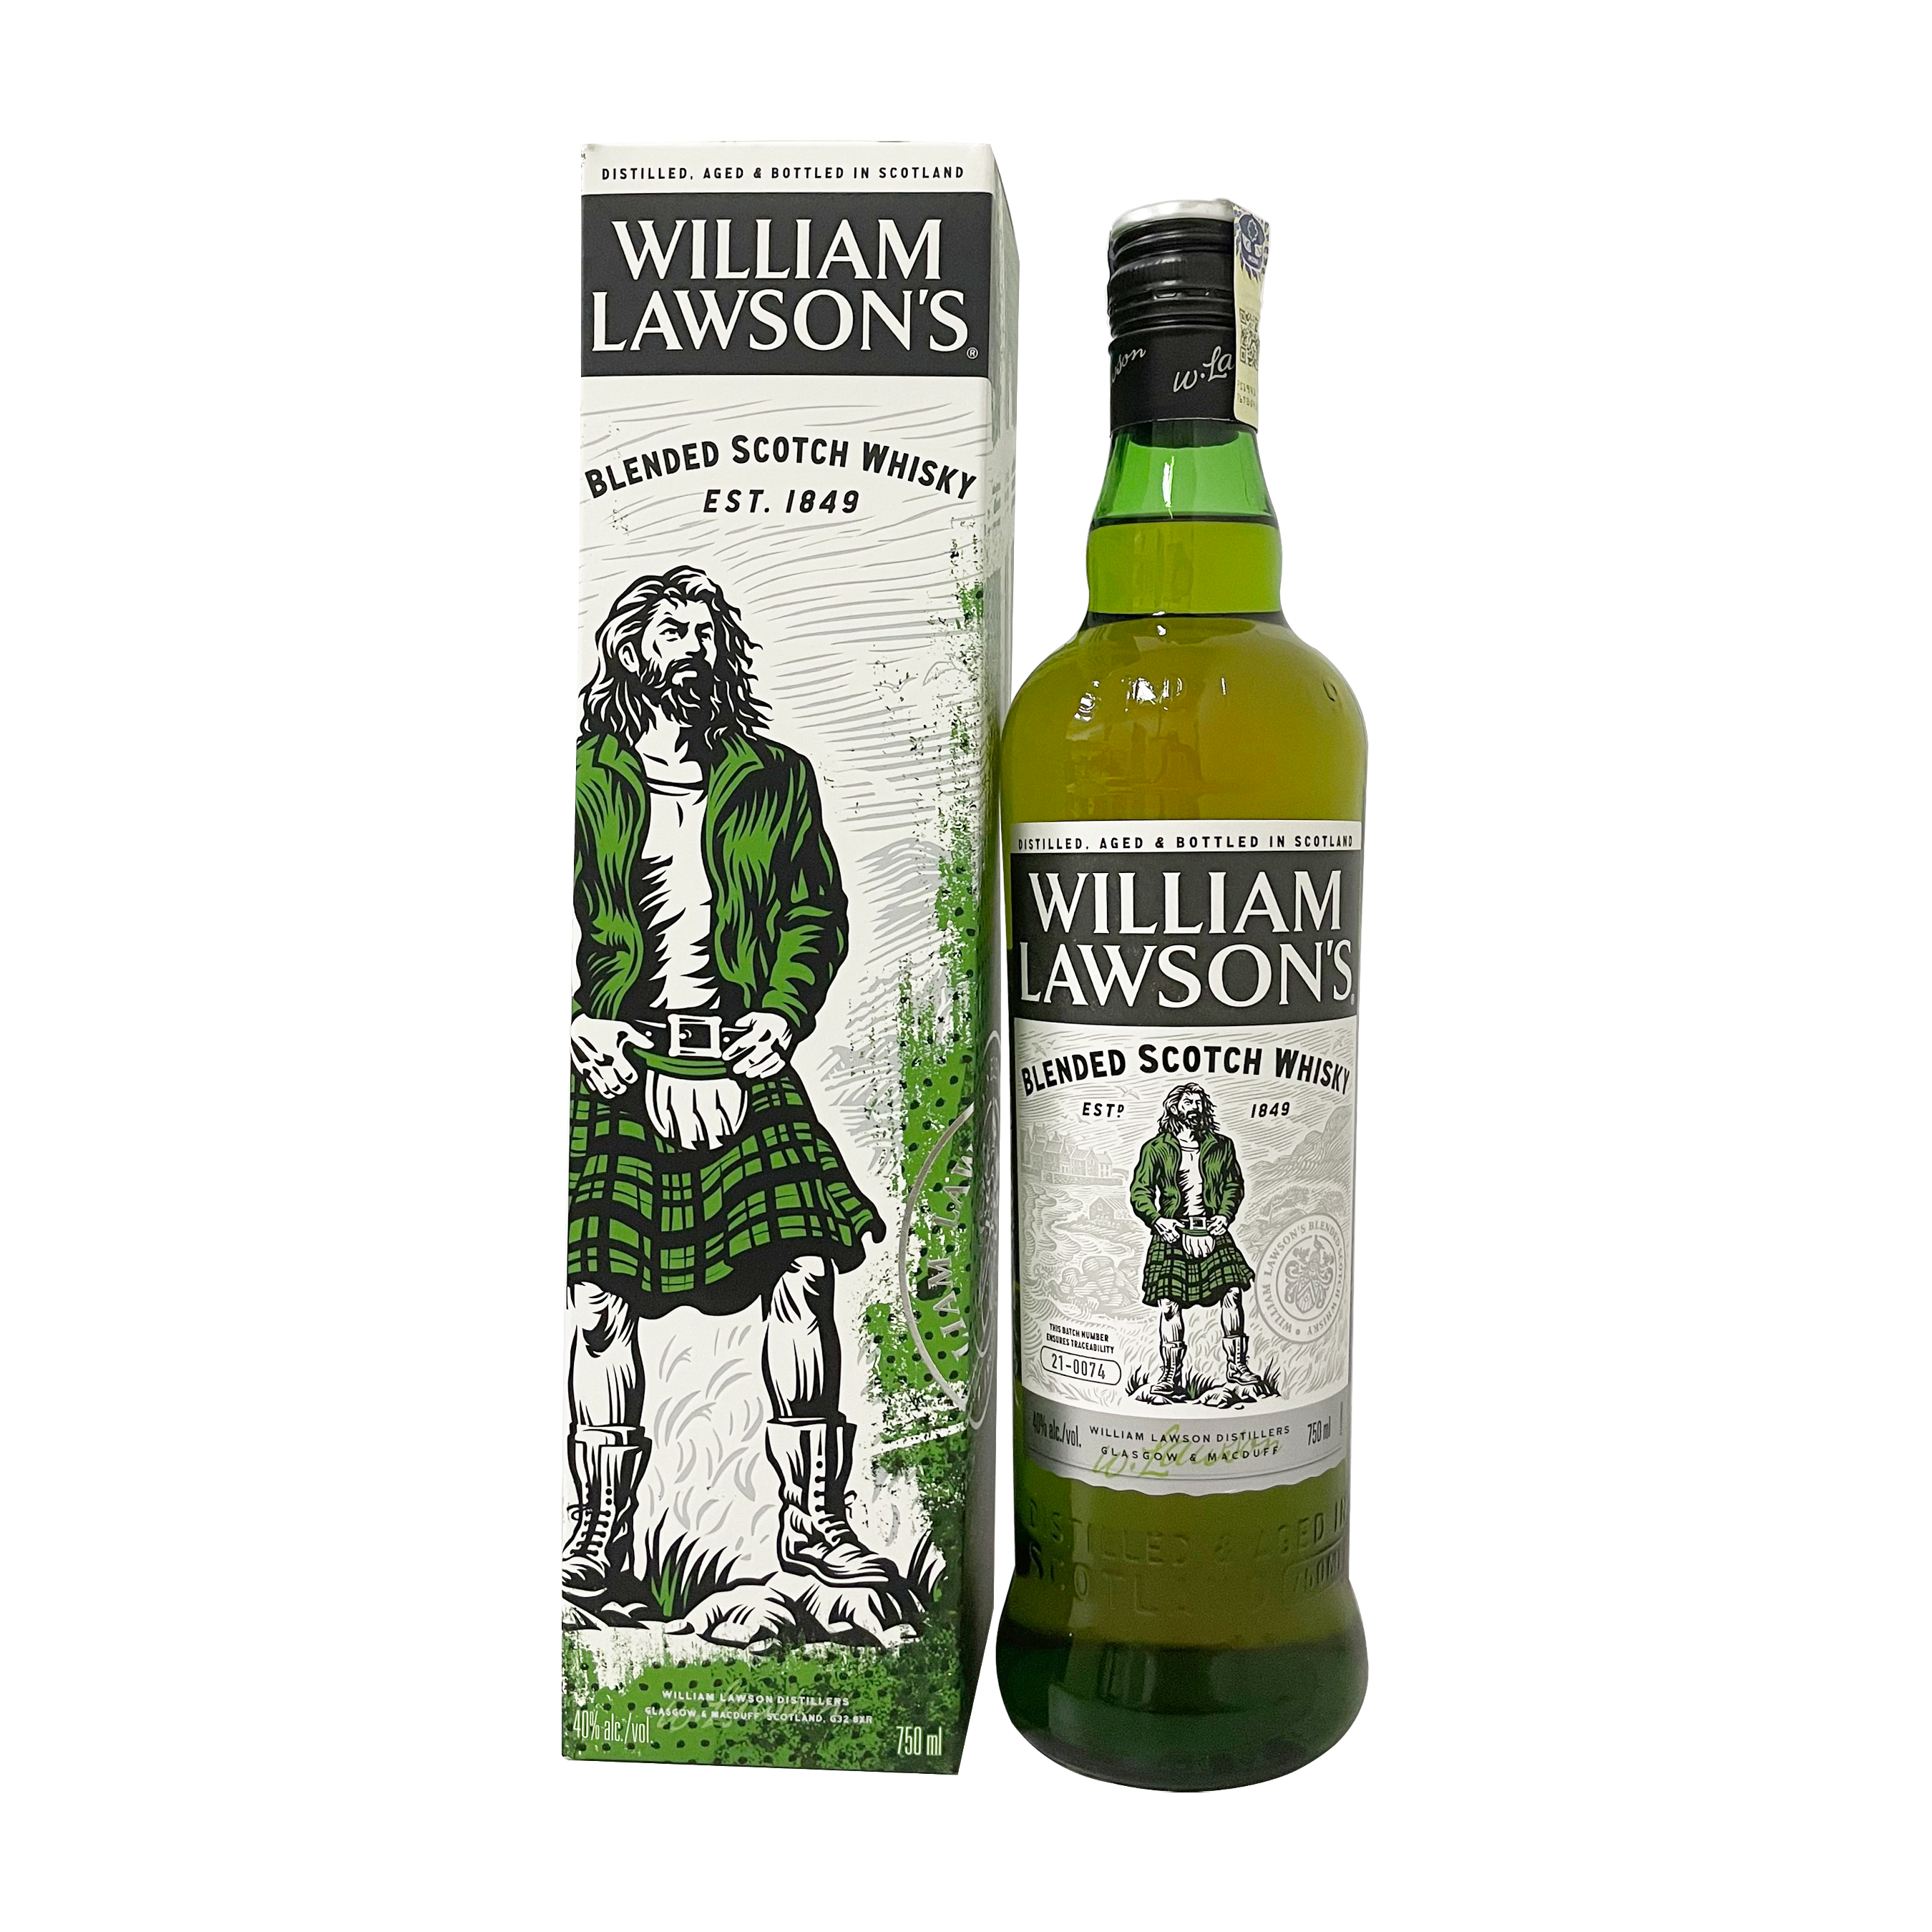 William Lawson's Blended Scotch Whisky (750ml) – Kanpai Malaysia